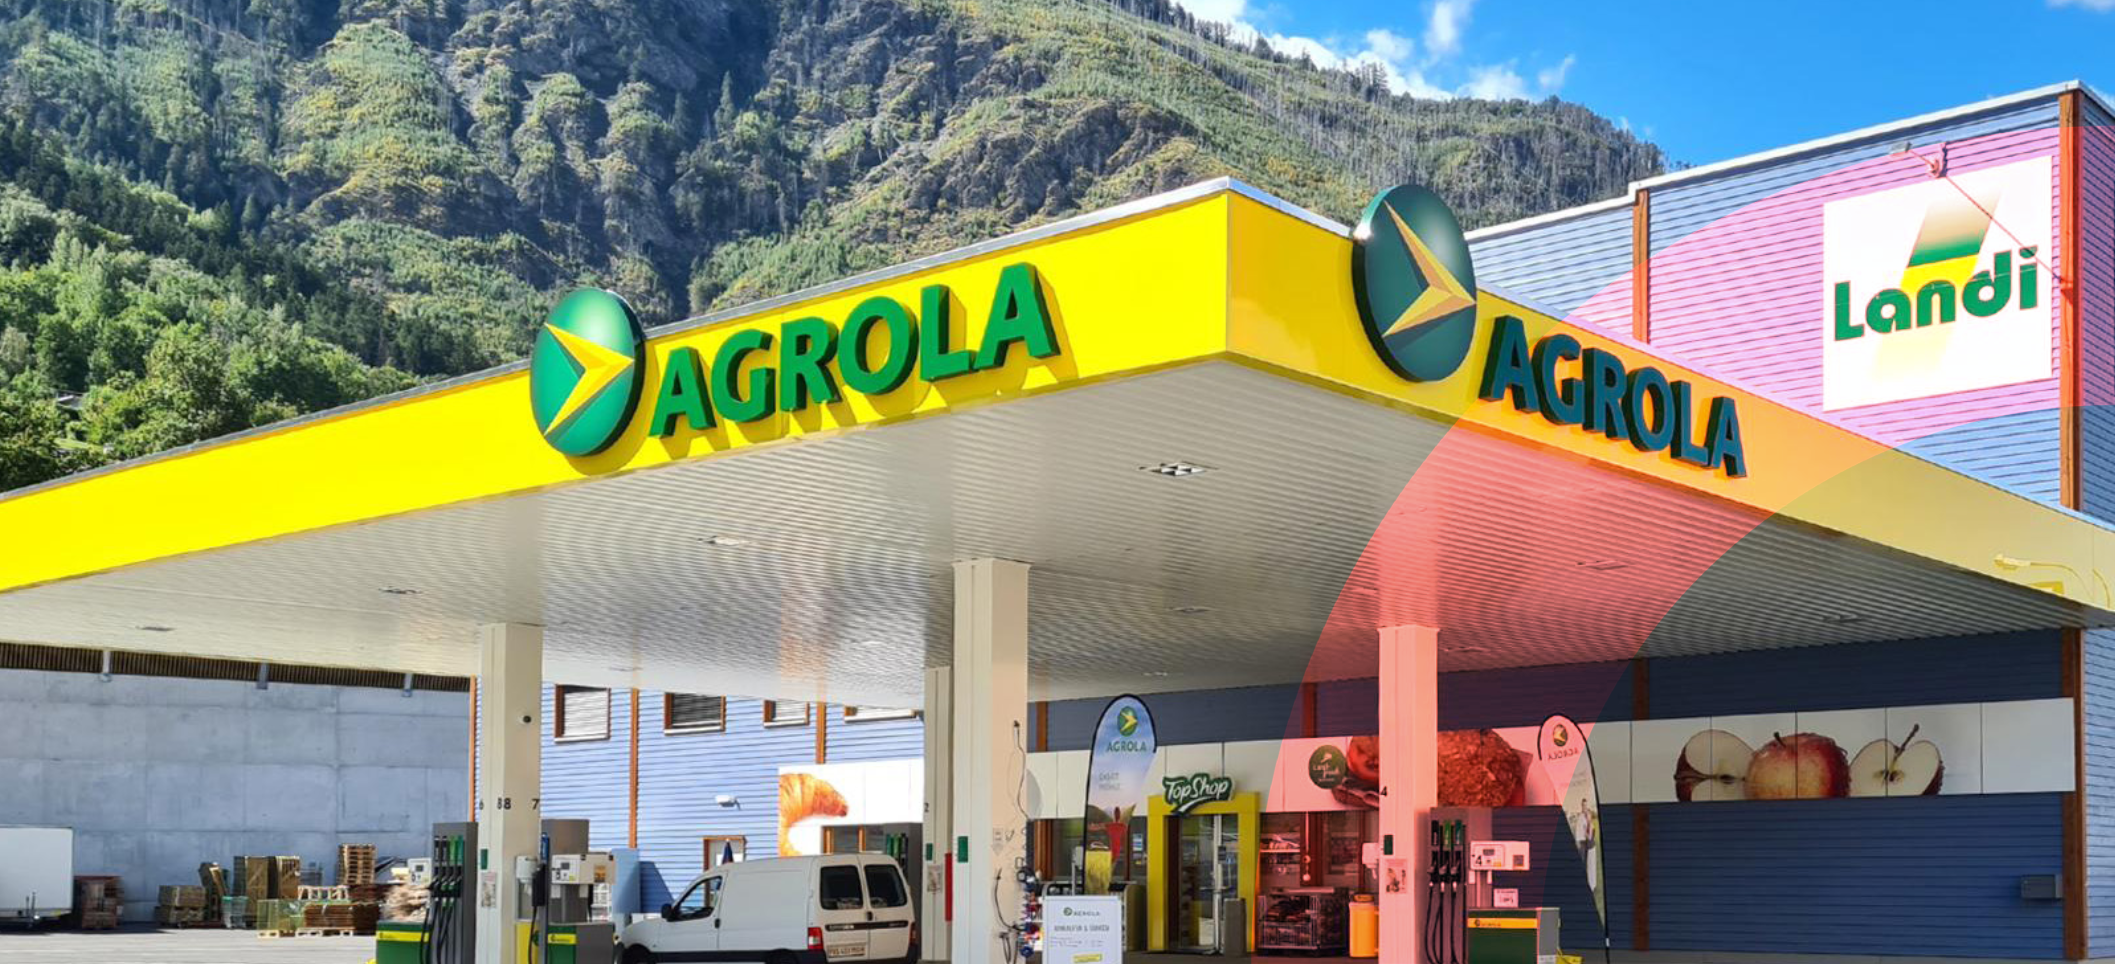 AGROLA digitalizes its marketing to optimize customer experience & sales